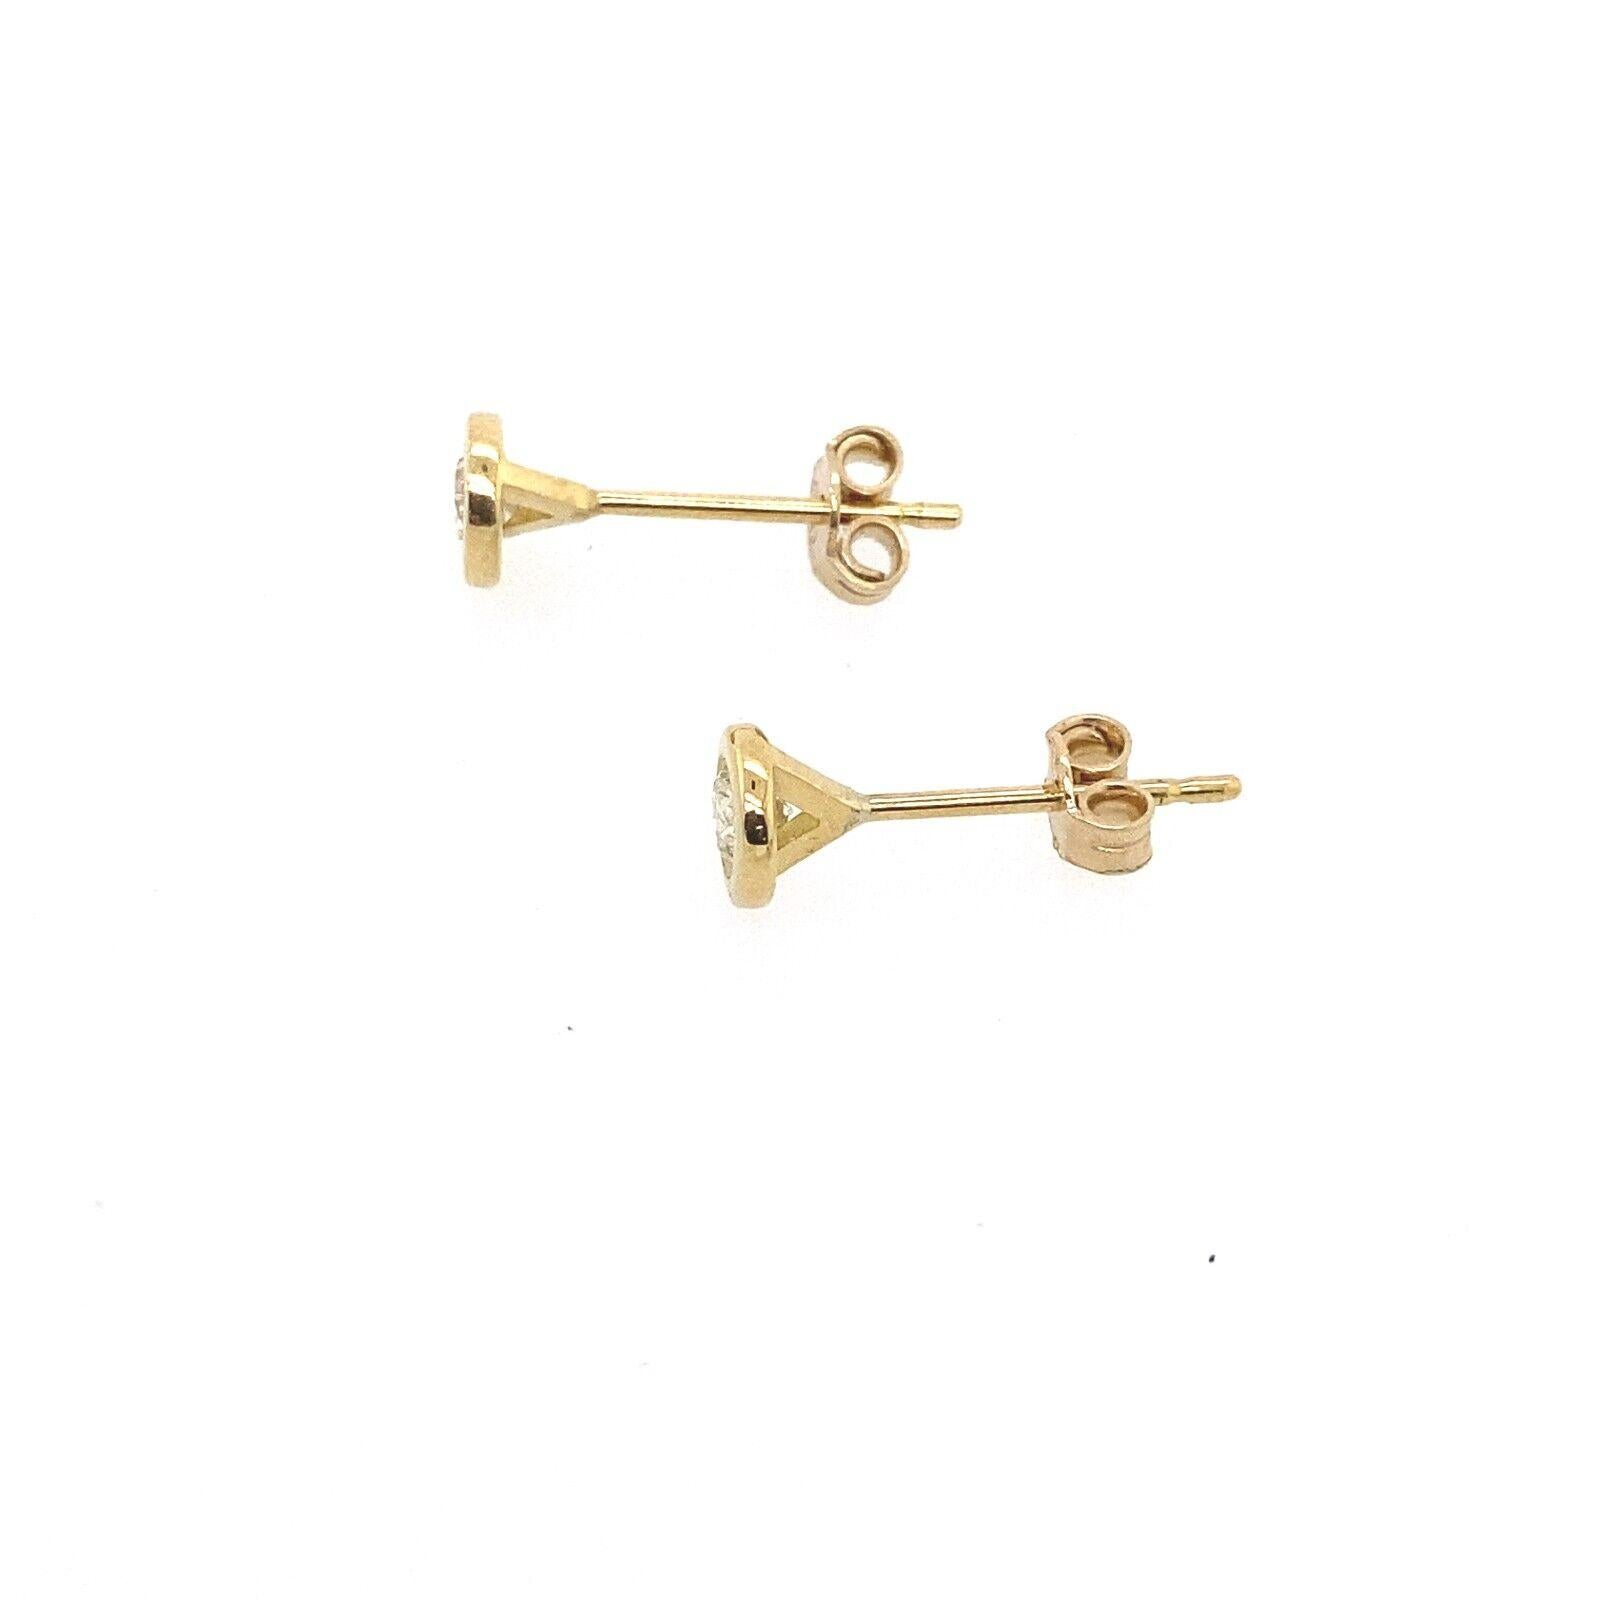 These 18ct Yellow Gold stud earrings are set  in a rubover setting and have a total Diamond weight of 0.20ct, for the ultimate in sparkle and shine.

Additional Information:
Total Diamond Weight: 0.20ct
Diamond Colour: H
Diamond Clarity: SI2
Total